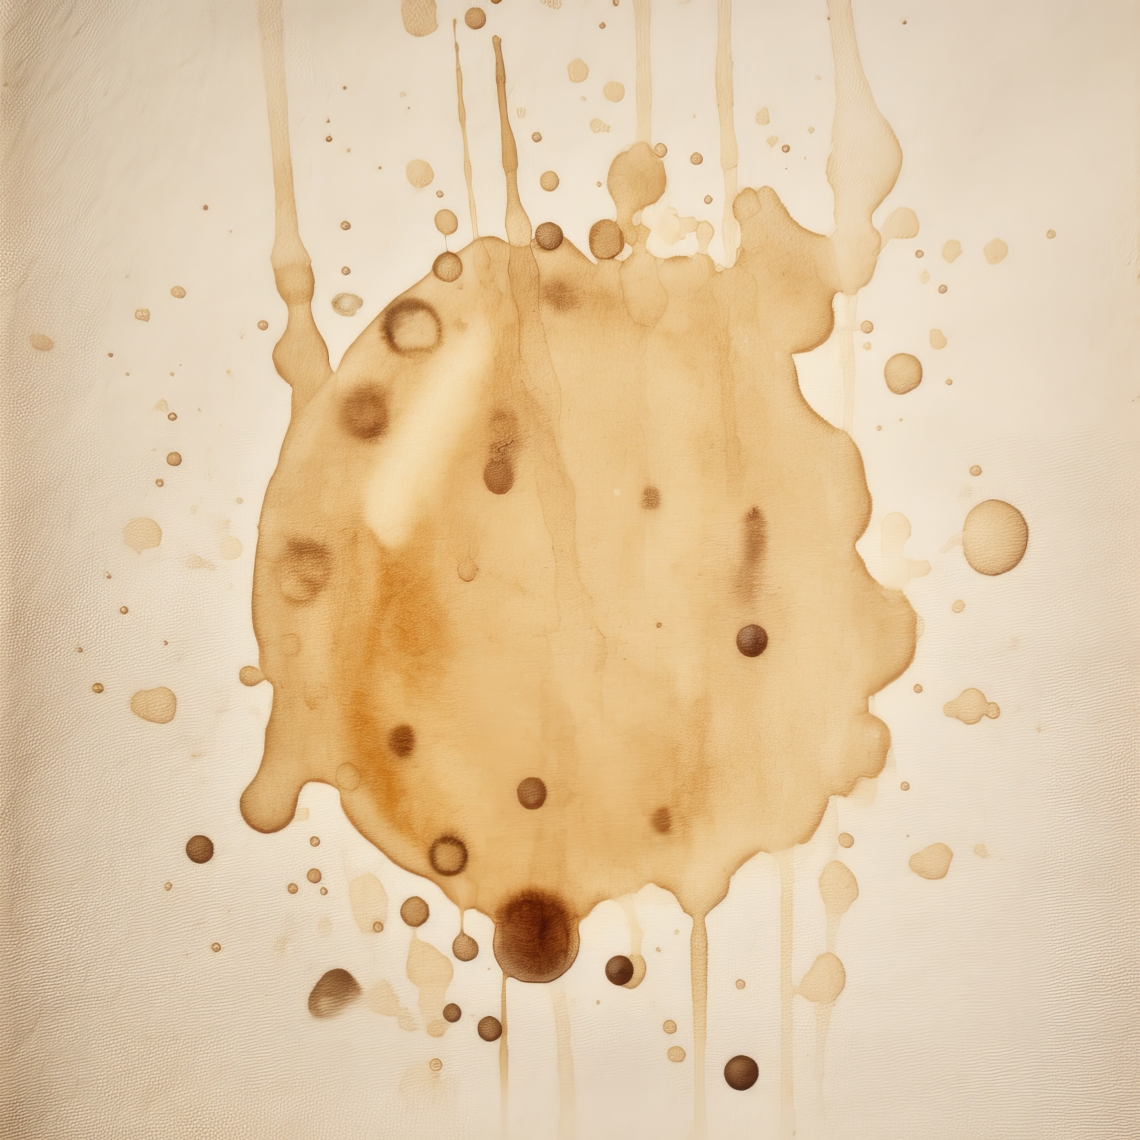 Stains_Splatters_030